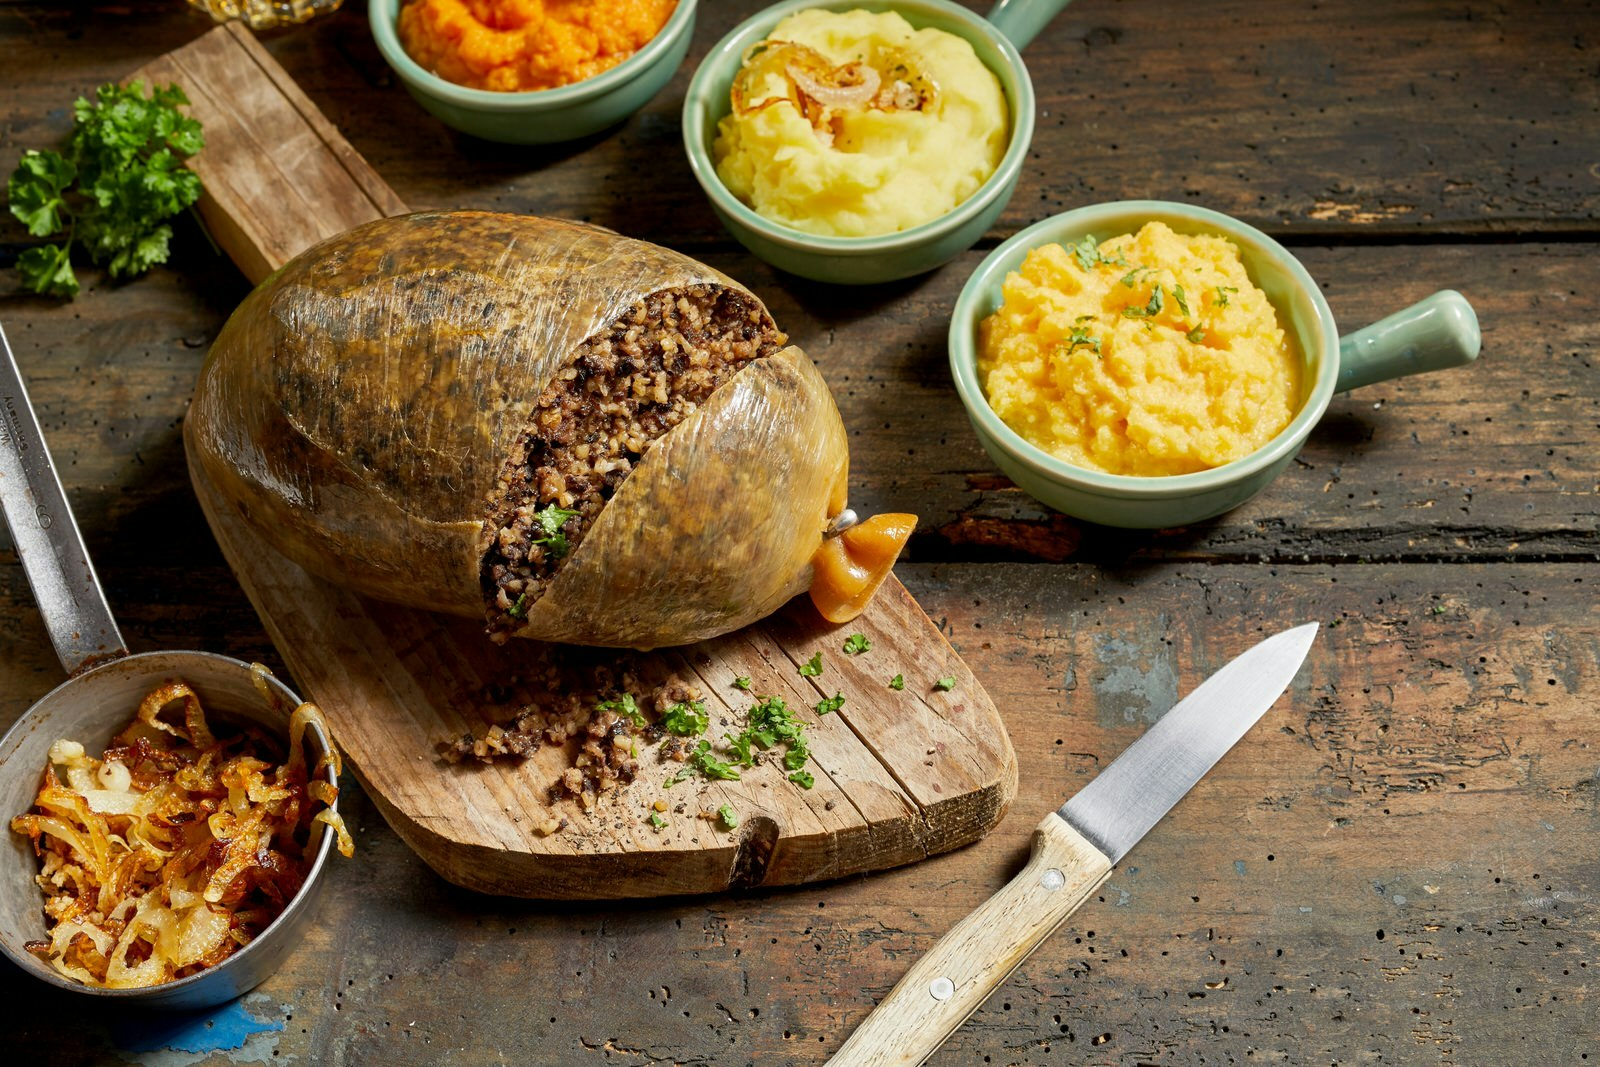 Traditional haggis meal for Robert Burns Supper, a Scottish tradition with cooked sliced haggis, neeps, tatties, onion and carrot on a rustic table